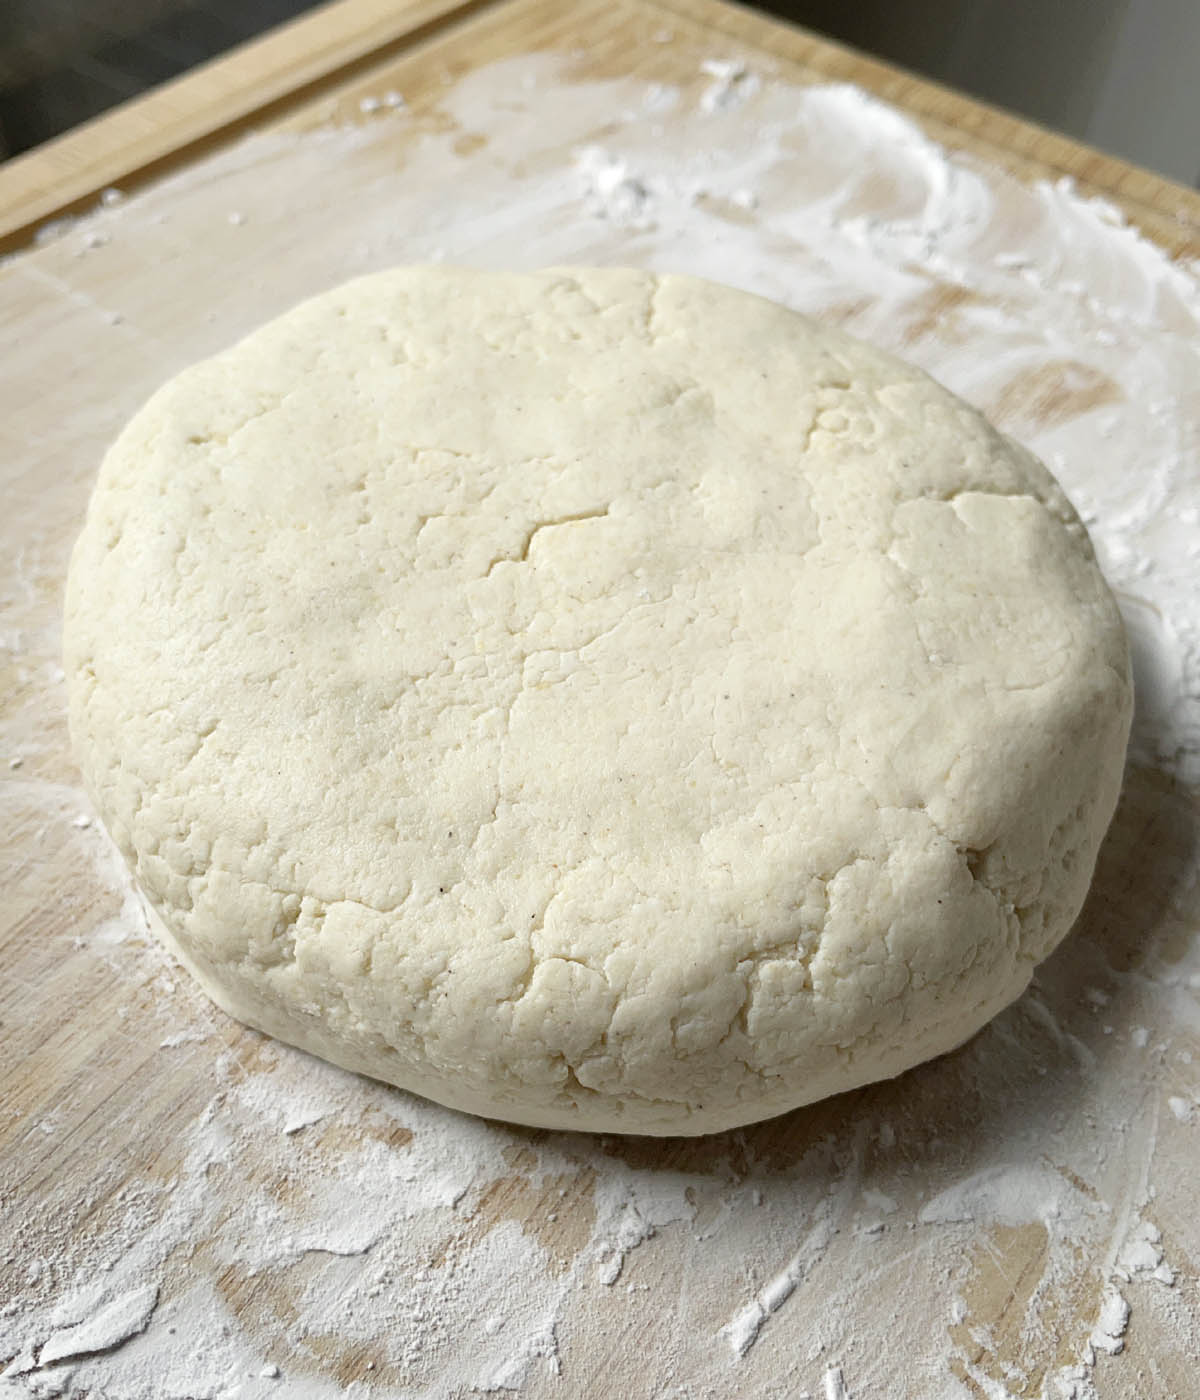 A disc shaped piece of dough on a floured wooden cutting board.